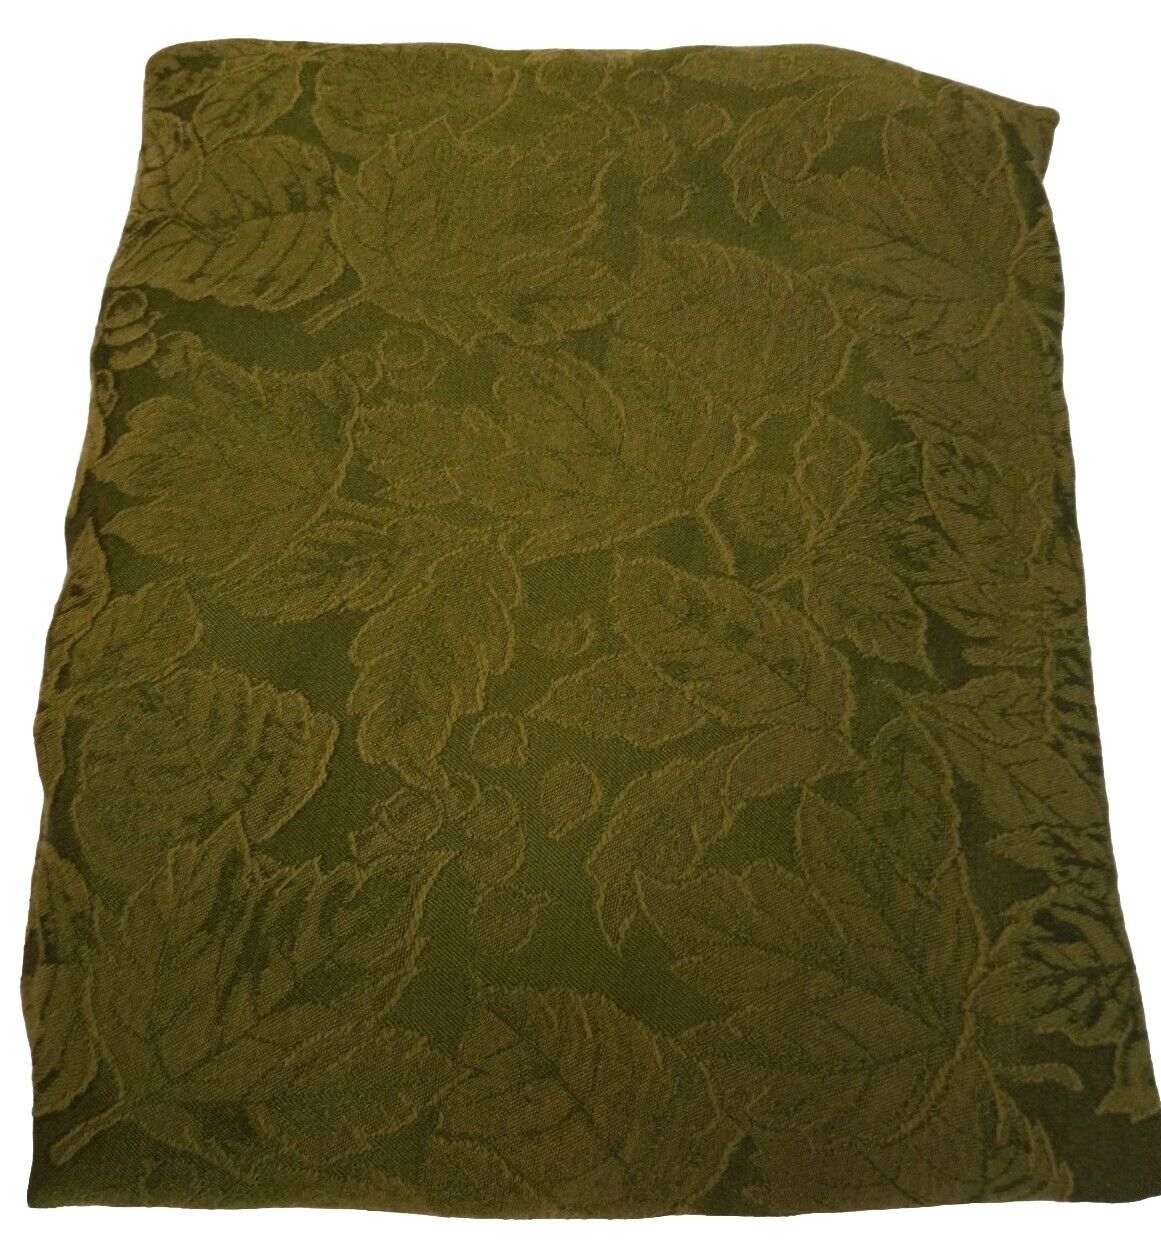 Vintage Mid-Century Mod 1970s Green/Leaves Fabric Tablecloth Rectangular